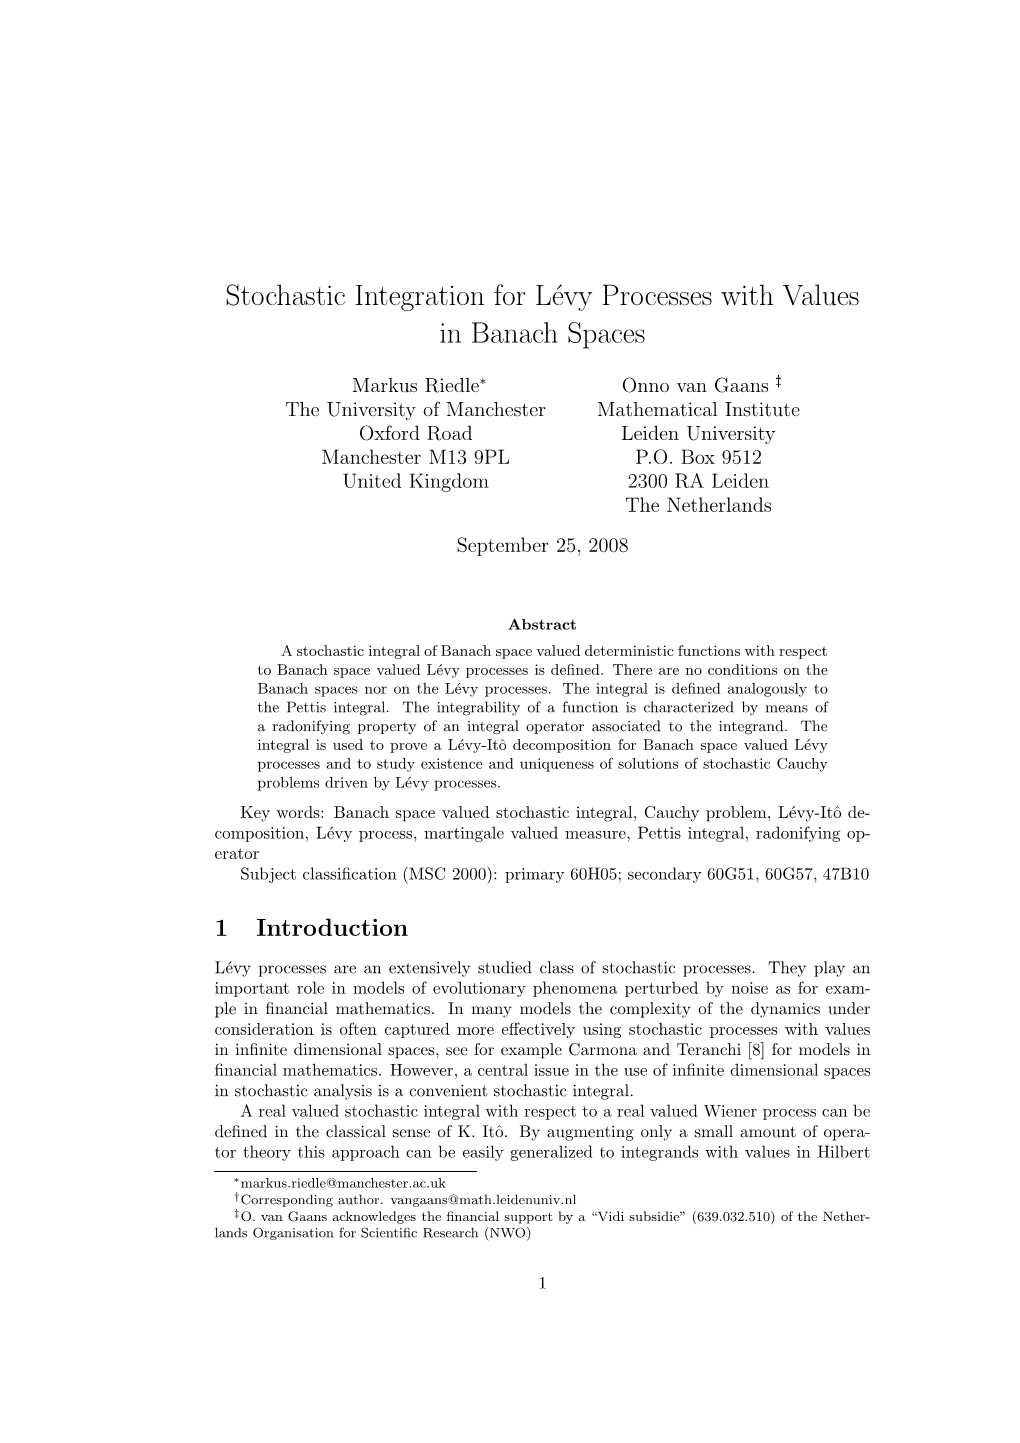 Stochastic Integration for Lévy Processes with Values in Banach